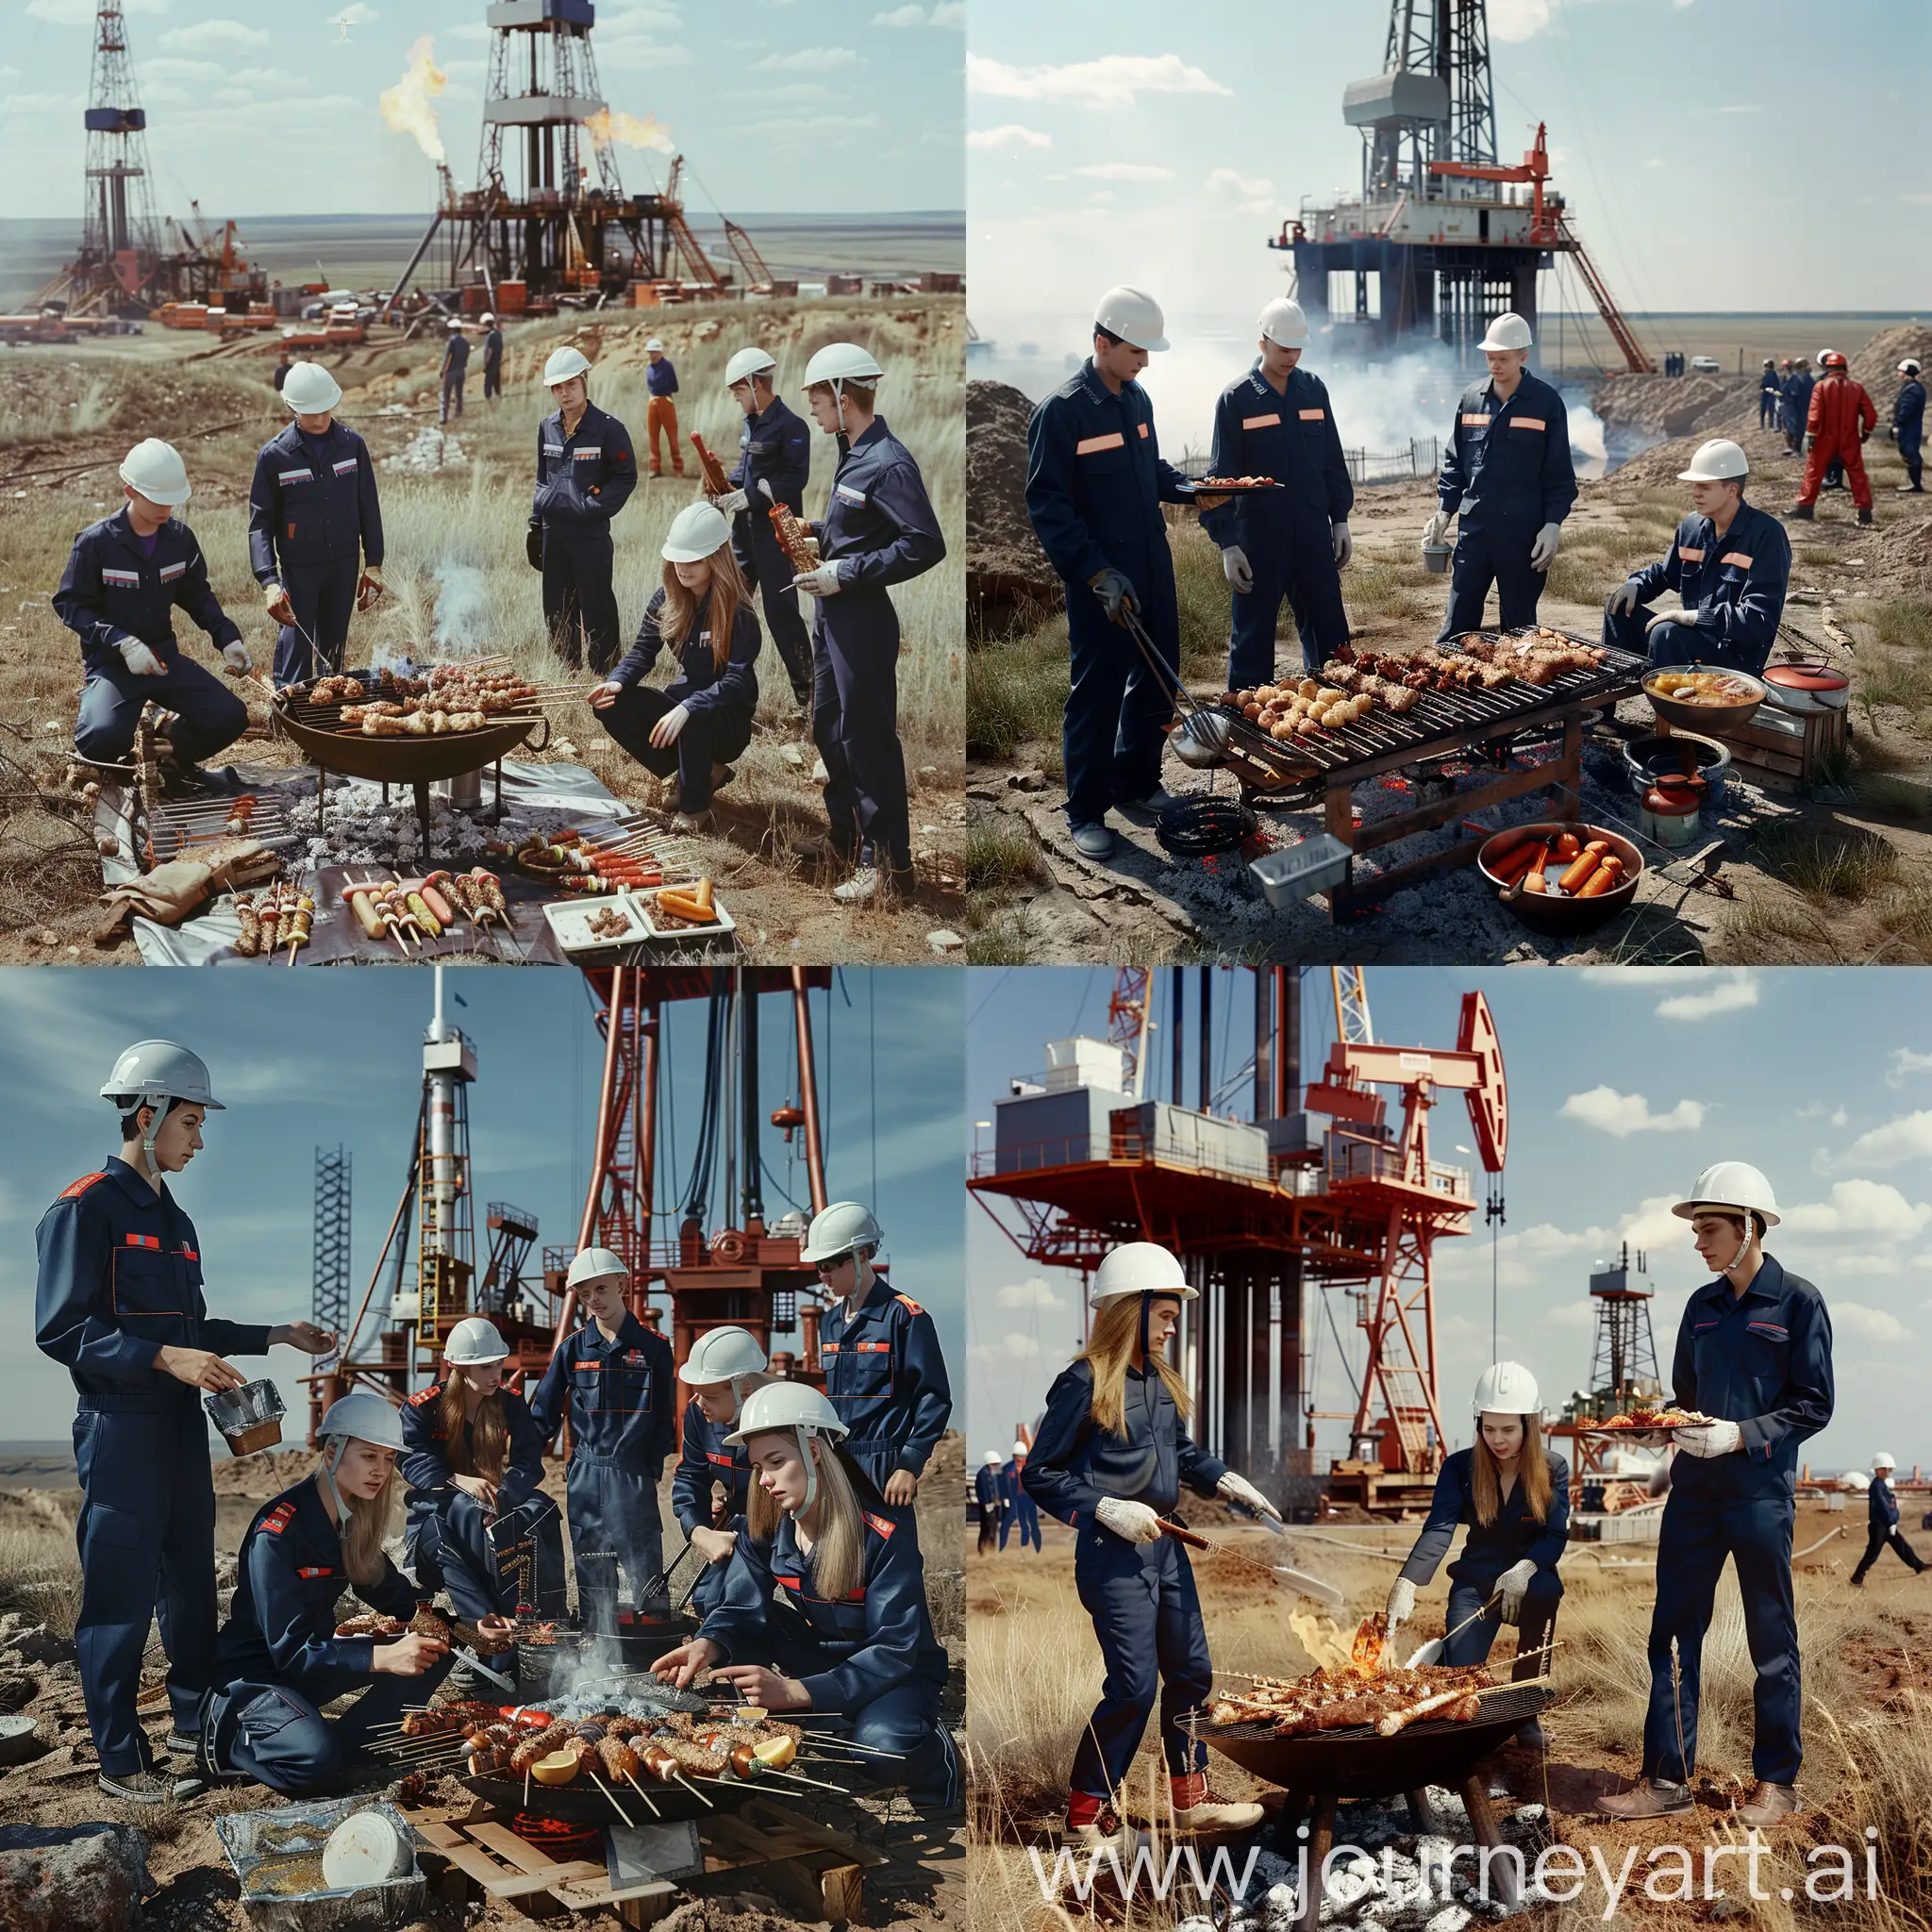 hyperrealistic high-quality image of  young youth students oil workers in dark blue professional uniform and white safety helmets having a barbecue picnic in a Russian steppe, with an oil rig in the background, no other people in the background, normal human faces, sunny weather